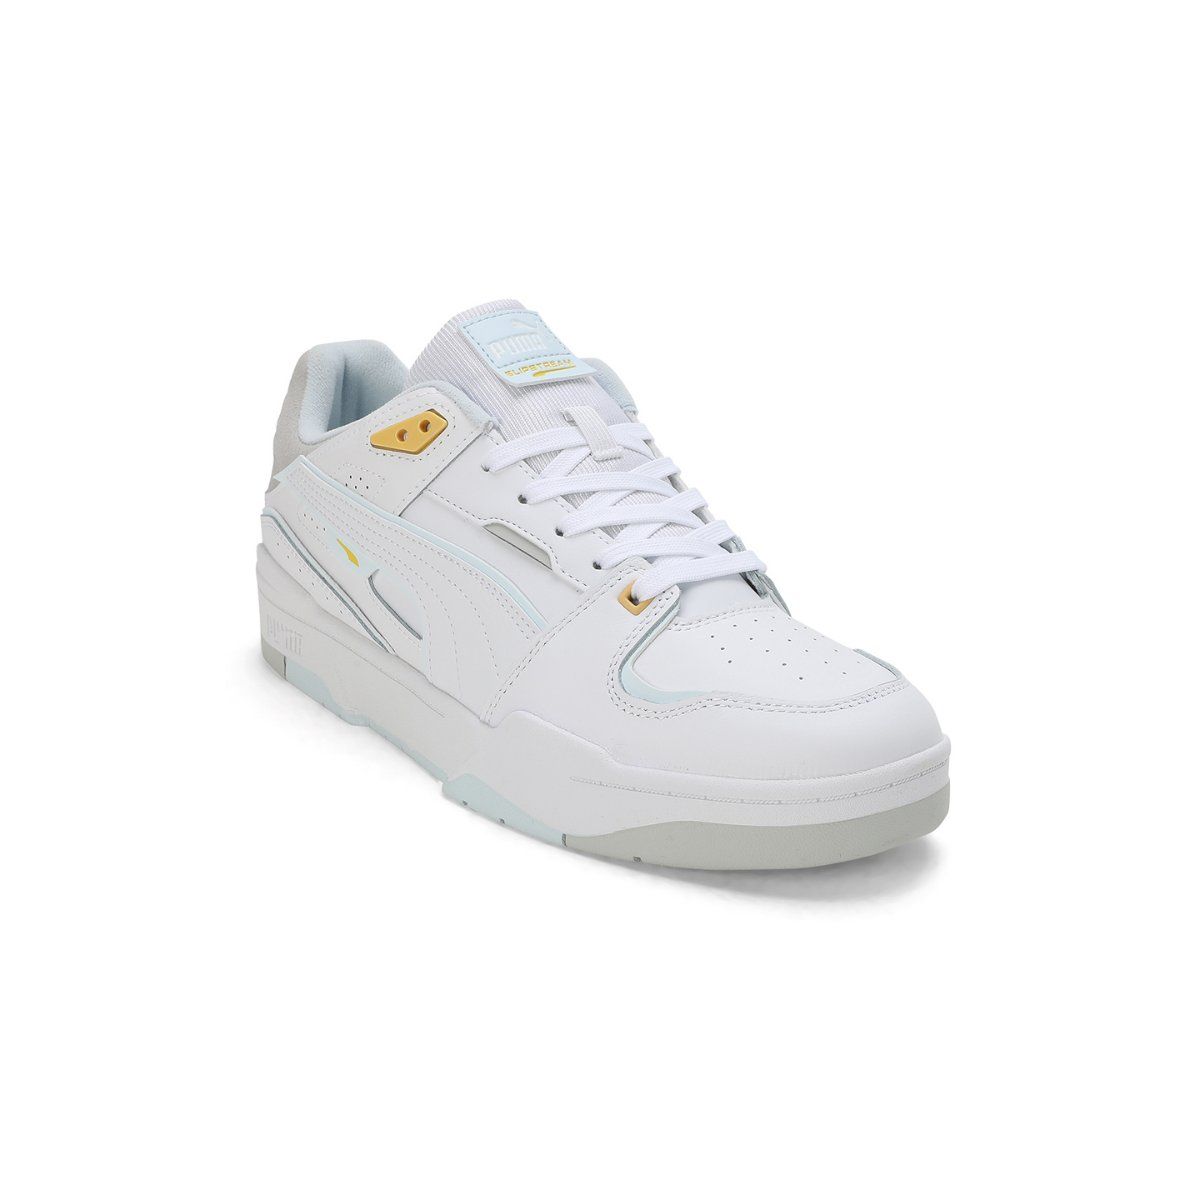 Adidas Originals Continental 80 Low Top White Sneakers G28215 Kids Size 1 |  eBay